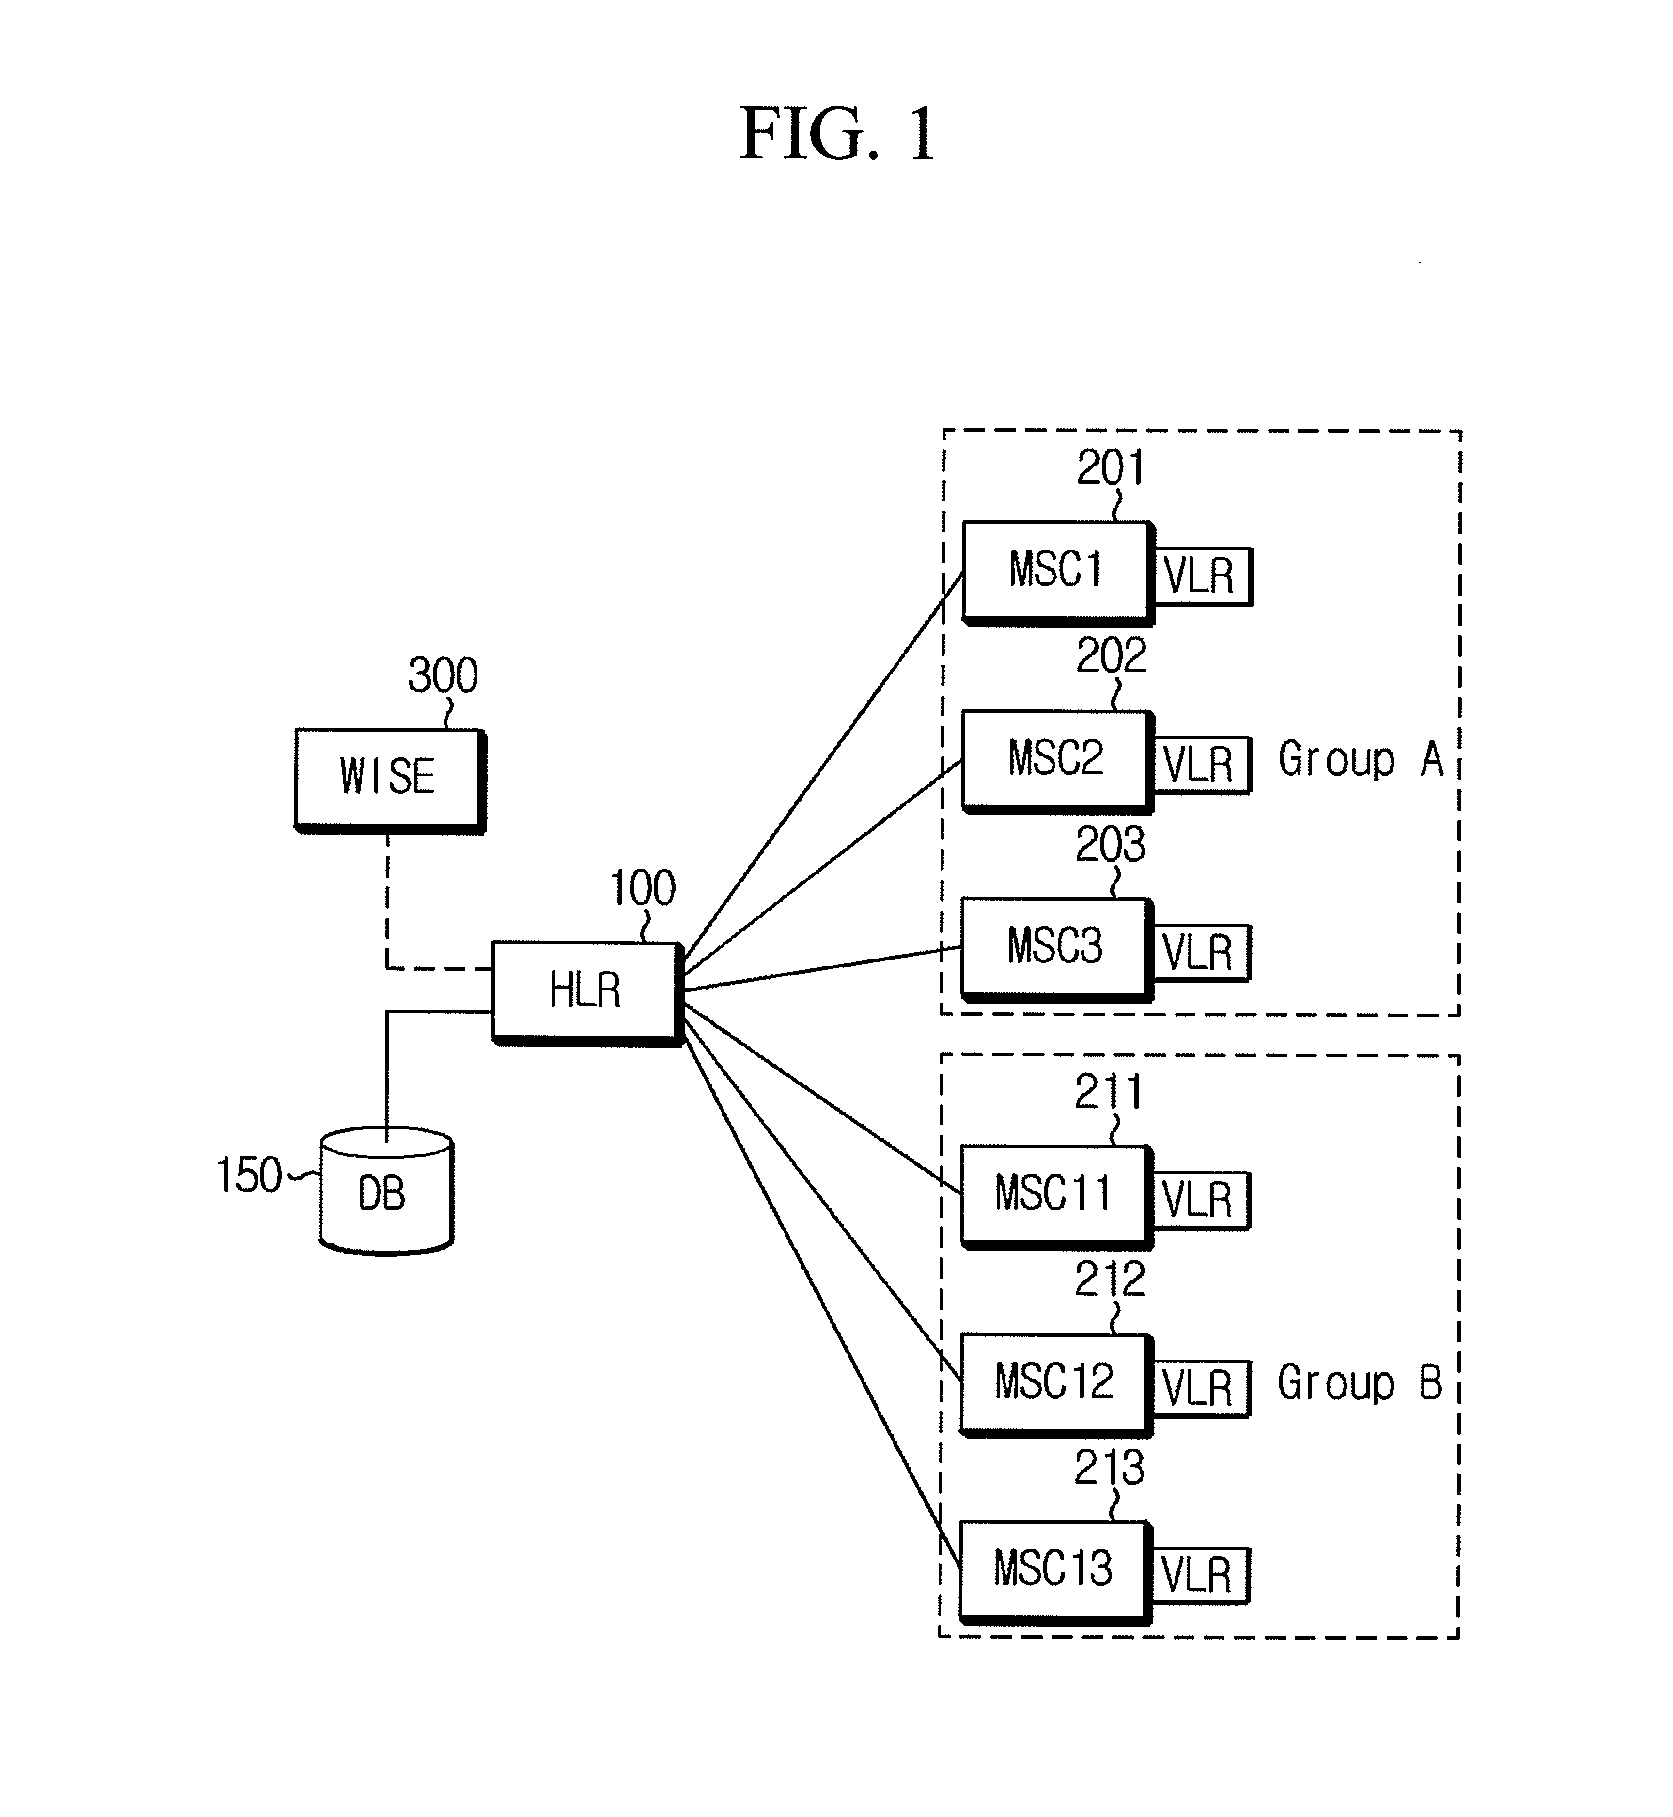 Method and apparatus for location registration update on failure to insert subscriber data in mobile communication system